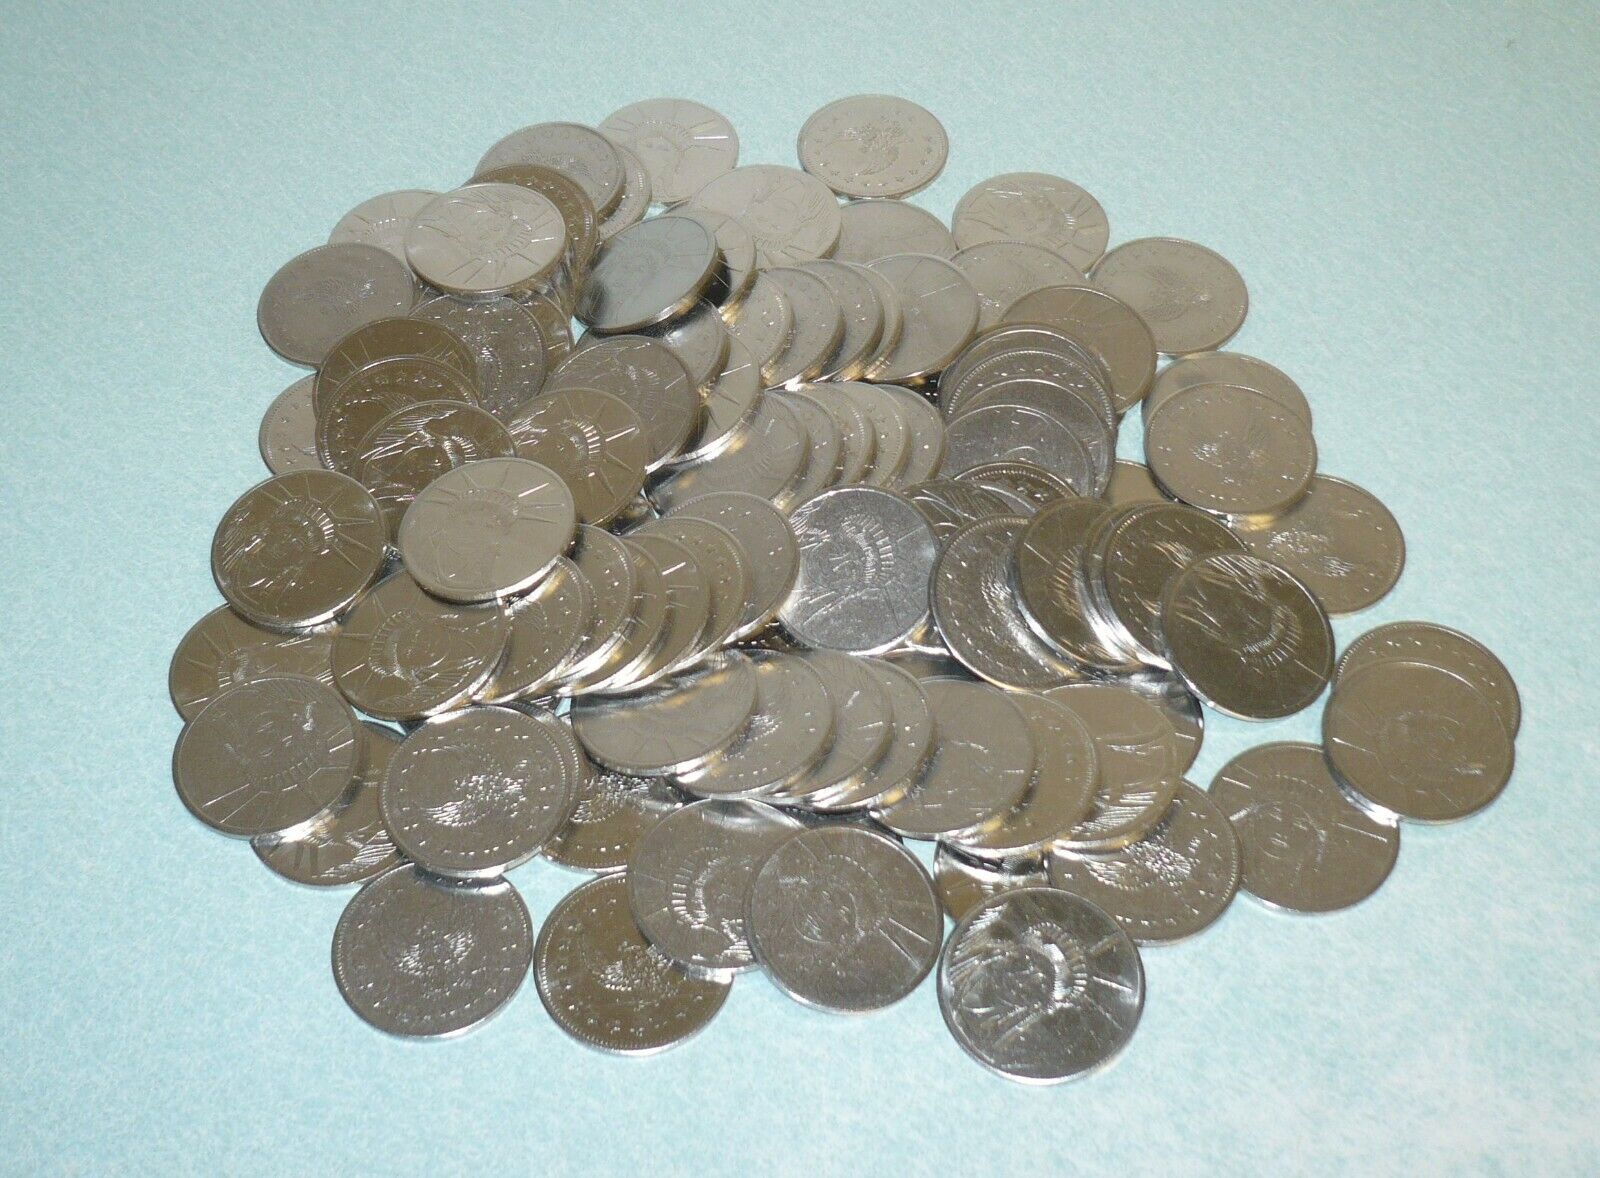 100 $1 DOLLAR SIZE STAINLESS SLOT MACHINE TOKENS - NEWLY MINTED Без бренда